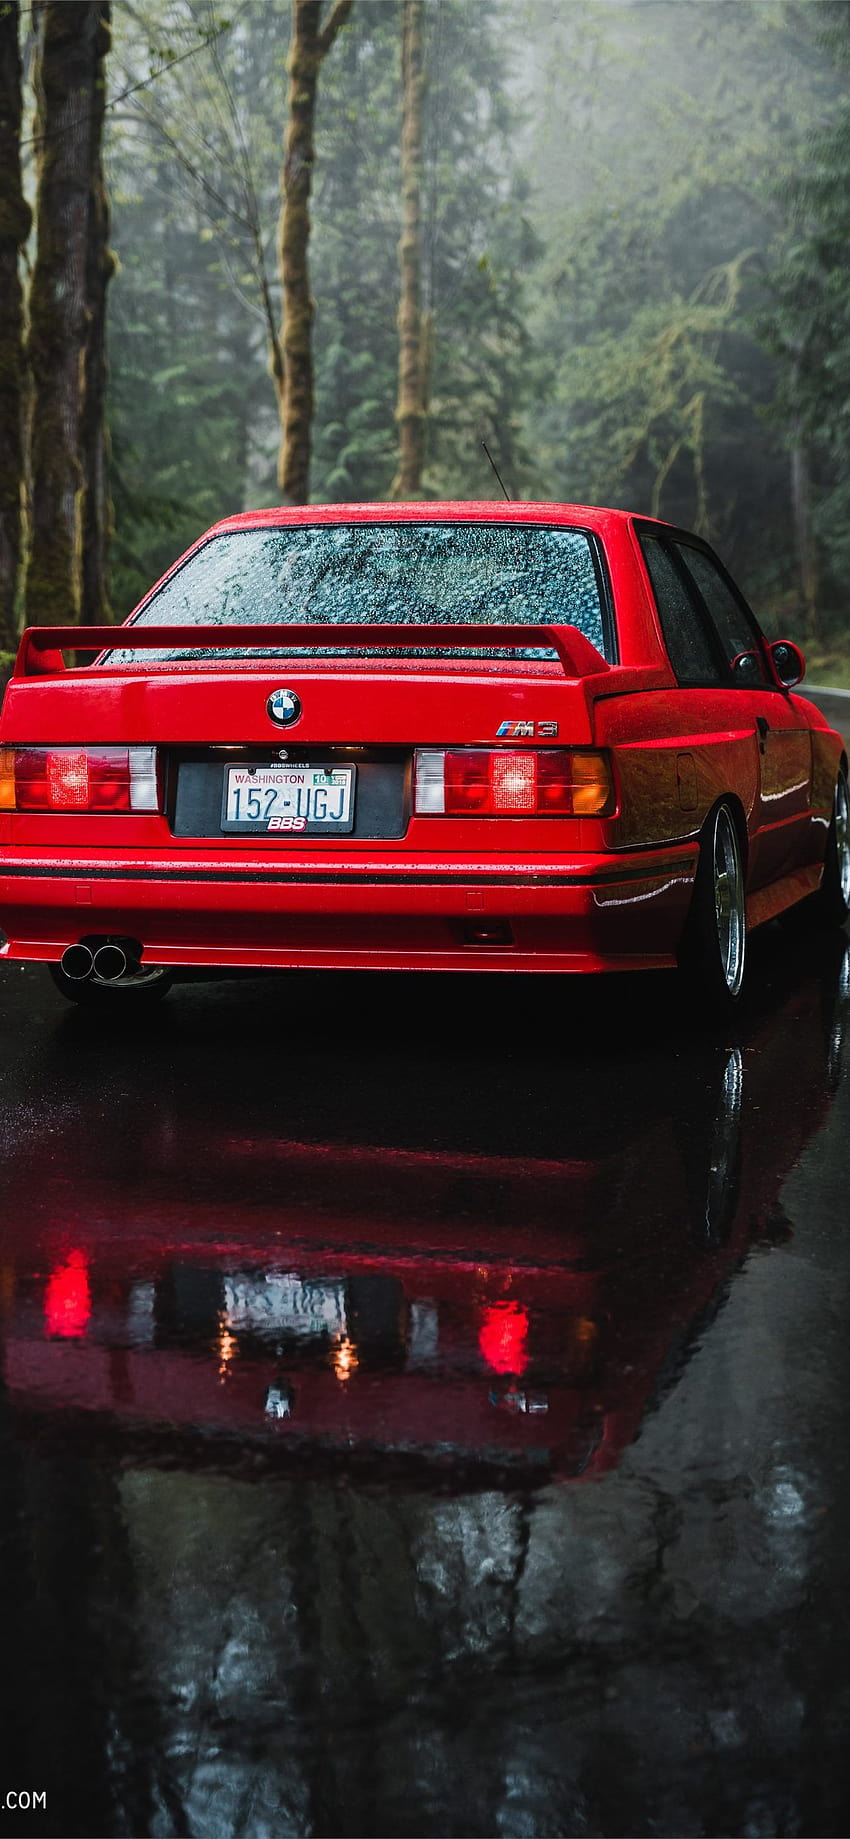 A red car parked in the rain - BMW